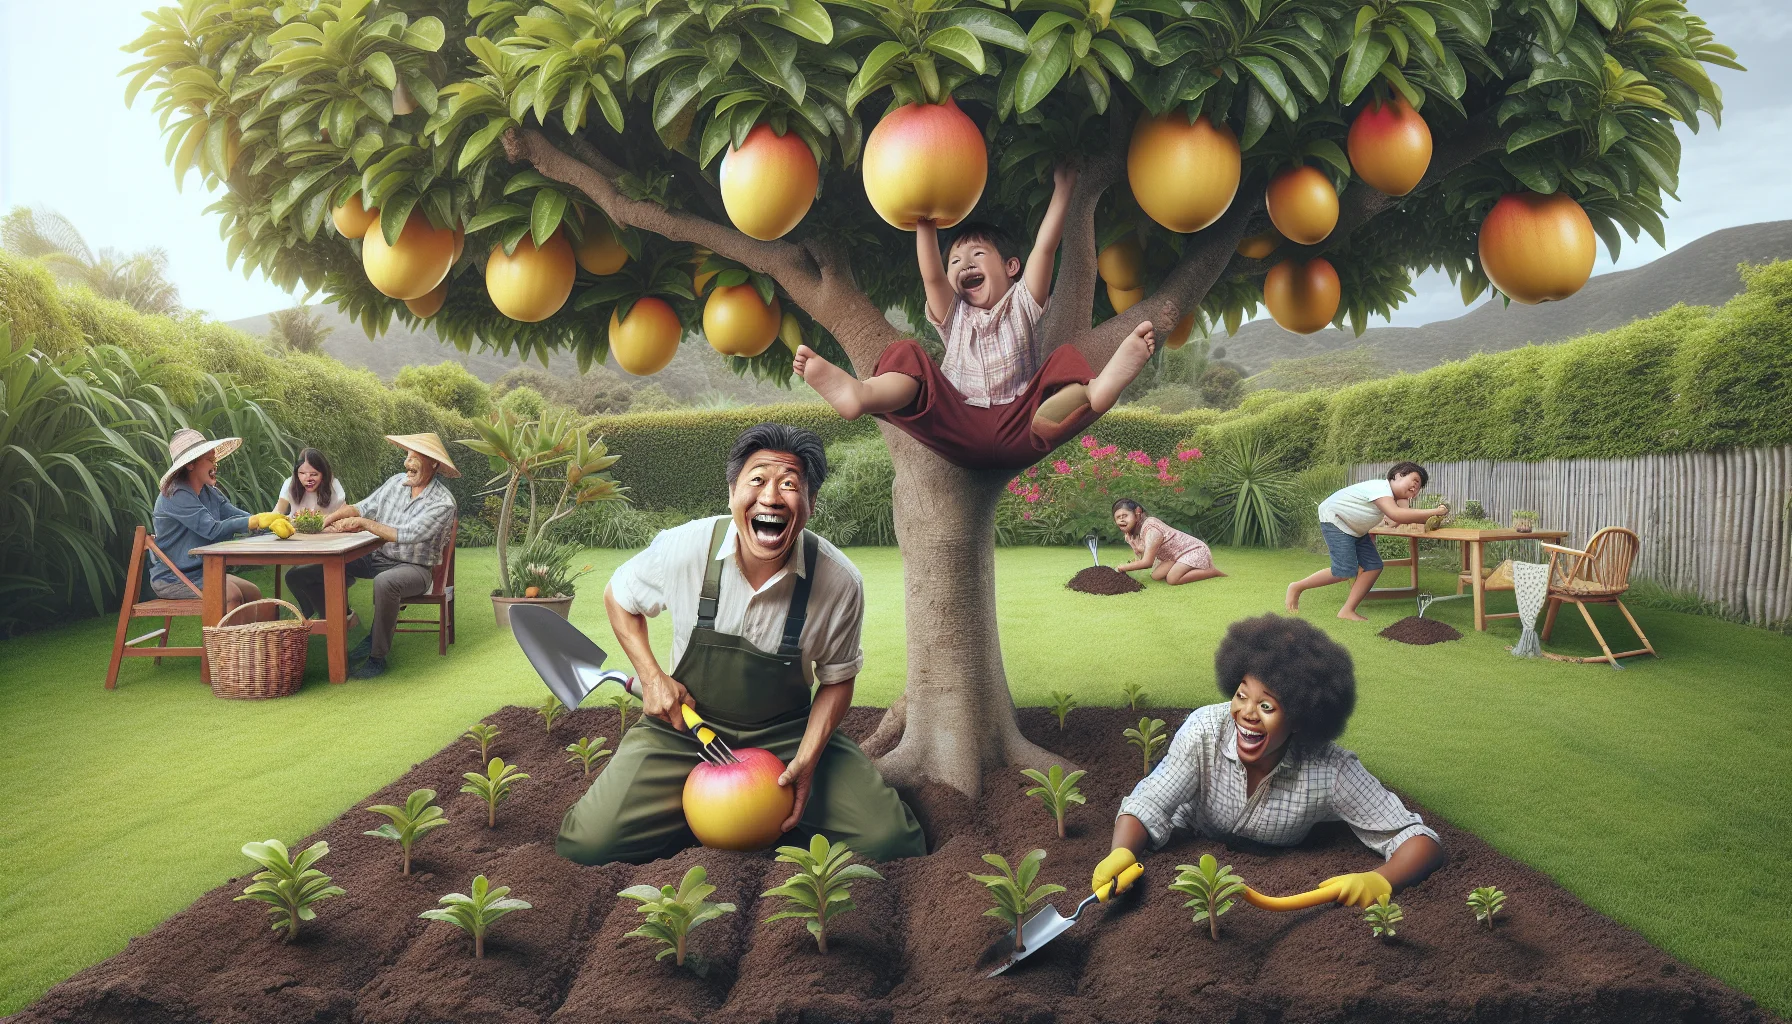 Generate an entertaining and real looking image featuring a scene in a lush garden, with multiple people occupying it. A central Asian man is on his knees with a trowel, digging under a ripe Nephelium lappaceum tree, his face full of excitement. Meanwhile, an African woman on the other side of the garden is playfully hiding behind another tree, holding a ripe Nephelium lappaceum. Across the garden, a child of Hispanic descent is sitting on the grass, immersed in planting seedlings but attemptedly reaching out to grab a hanging Nephelium lappaceum. This lively scene should evoke a sense of fun inherent in gardening and entice people to join the activity.